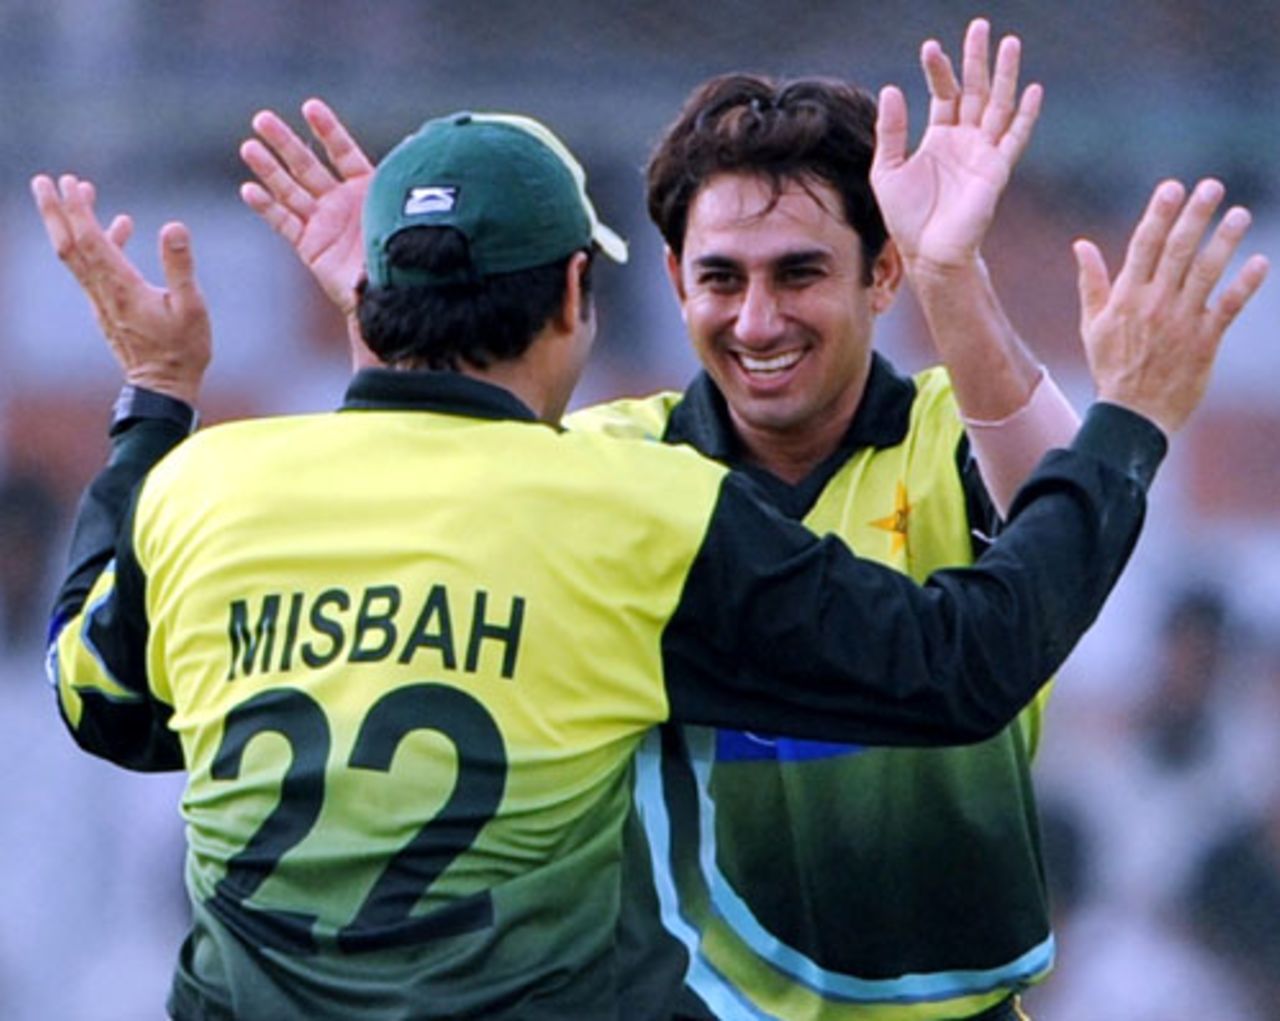 Saeed Ajmal is congratulated by Misbah-ul-Haq on his first ODI wicket, Pakistan v India, Super Four, Asia Cup, Karachi, July 2, 2008